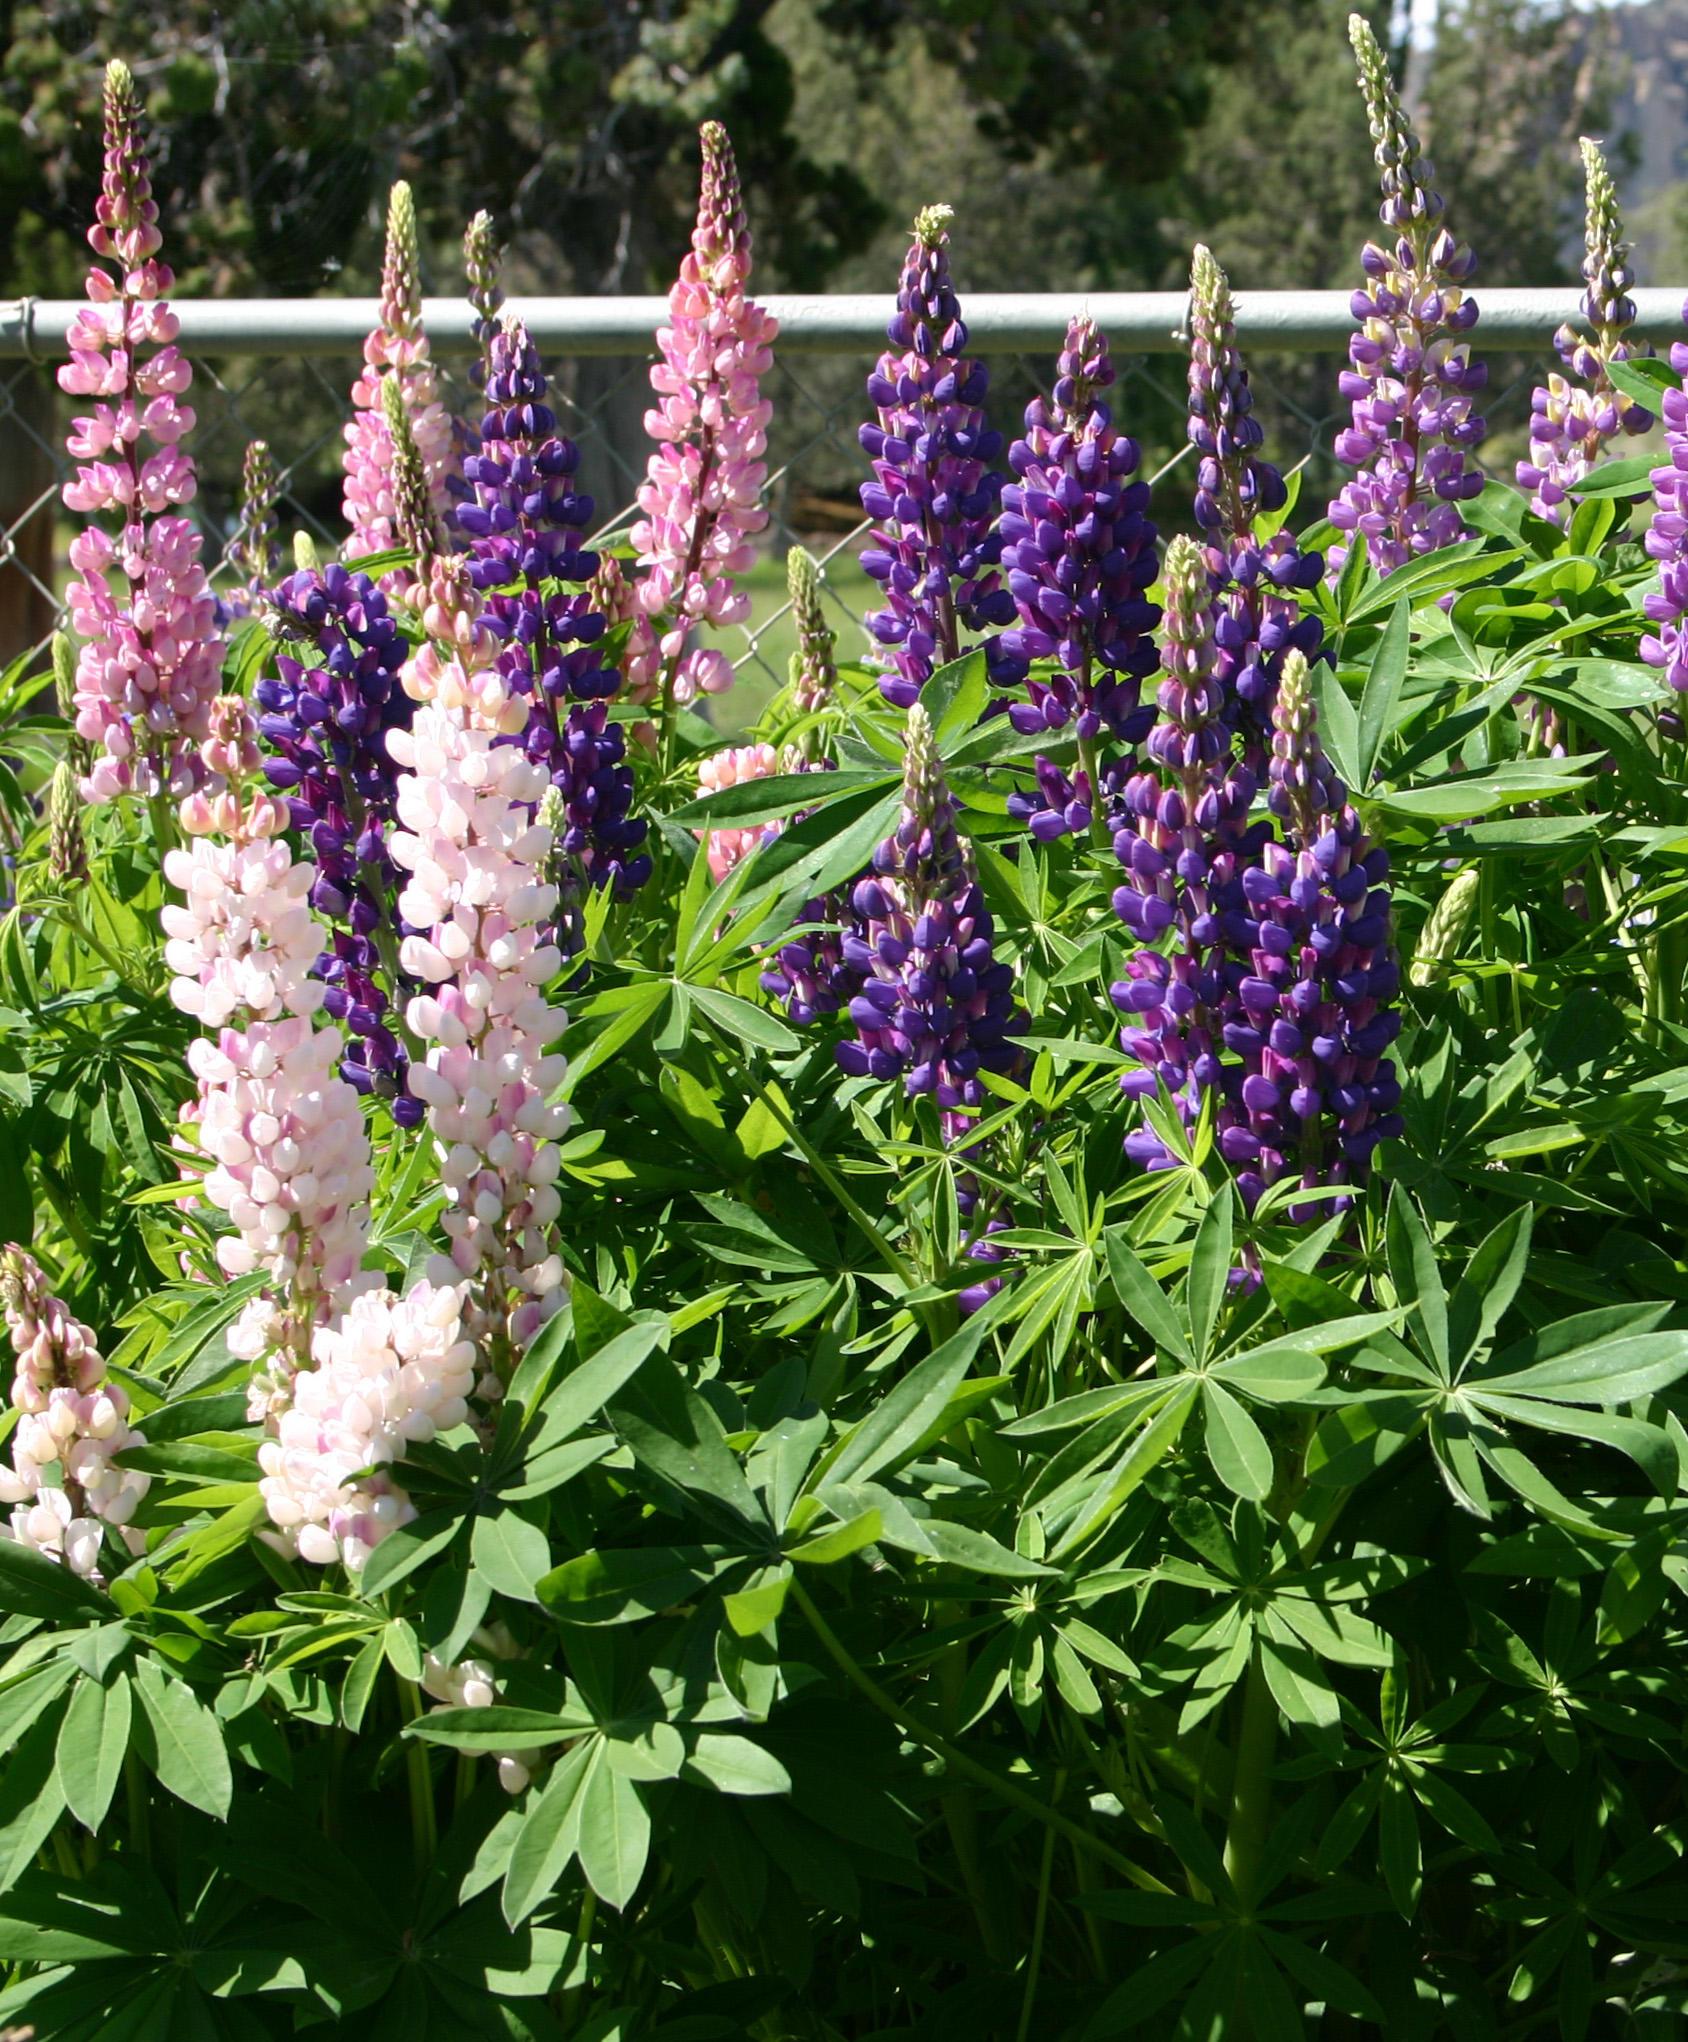 Lupine plants with blooms in various shades of pink and purple.